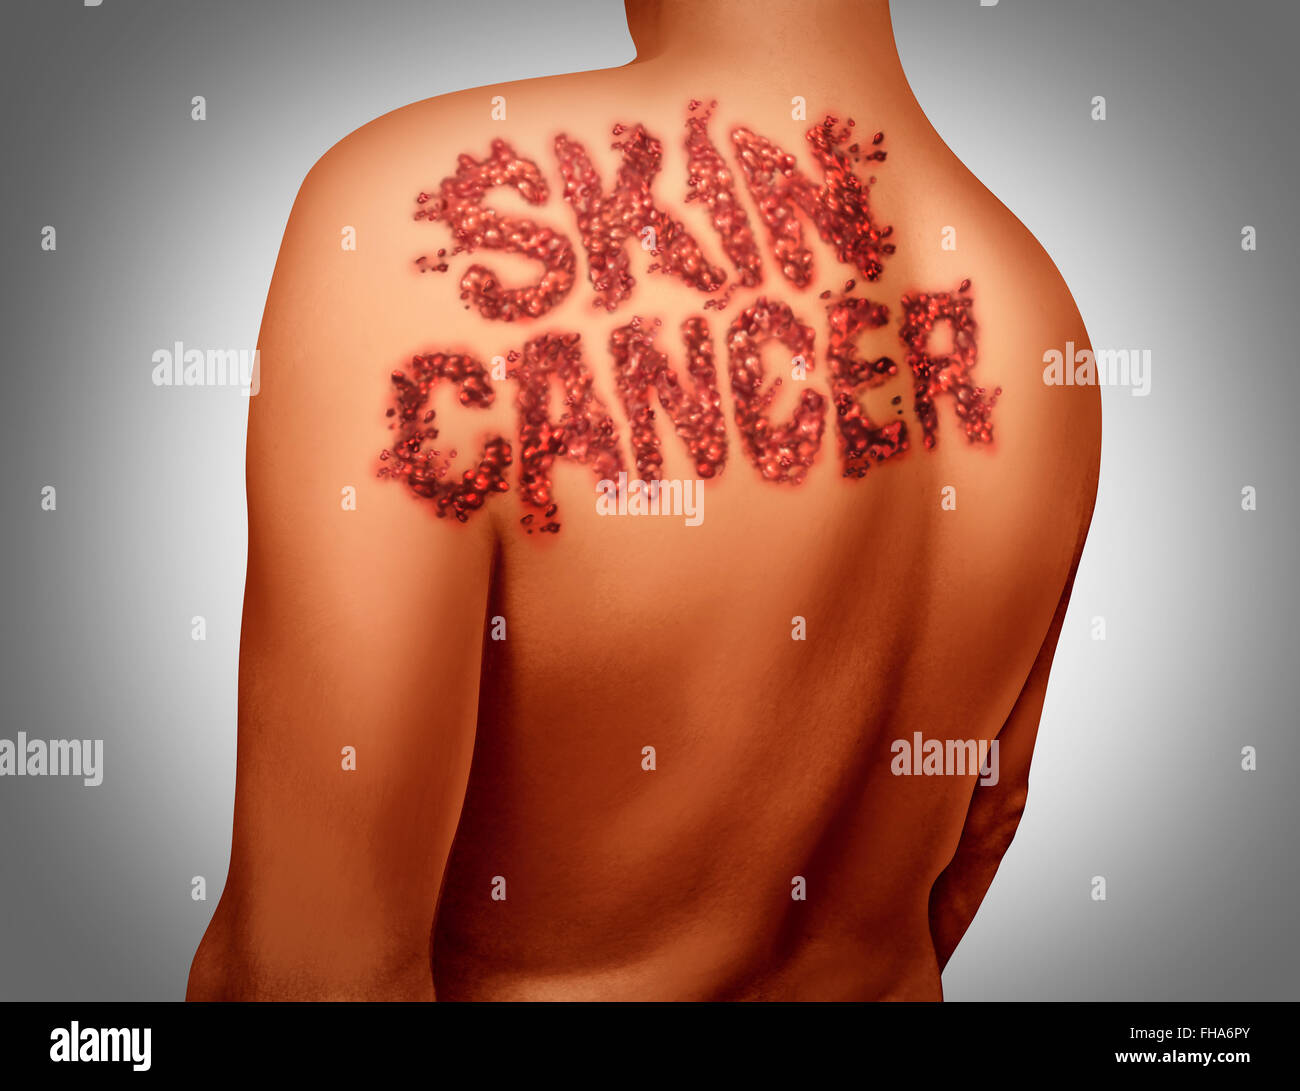 Skin cancer melanoma disease concept as a medical symbol of the human epidermis anatomy being attacked by malignant cancerous dark mole shaped as text on the body. Stock Photo